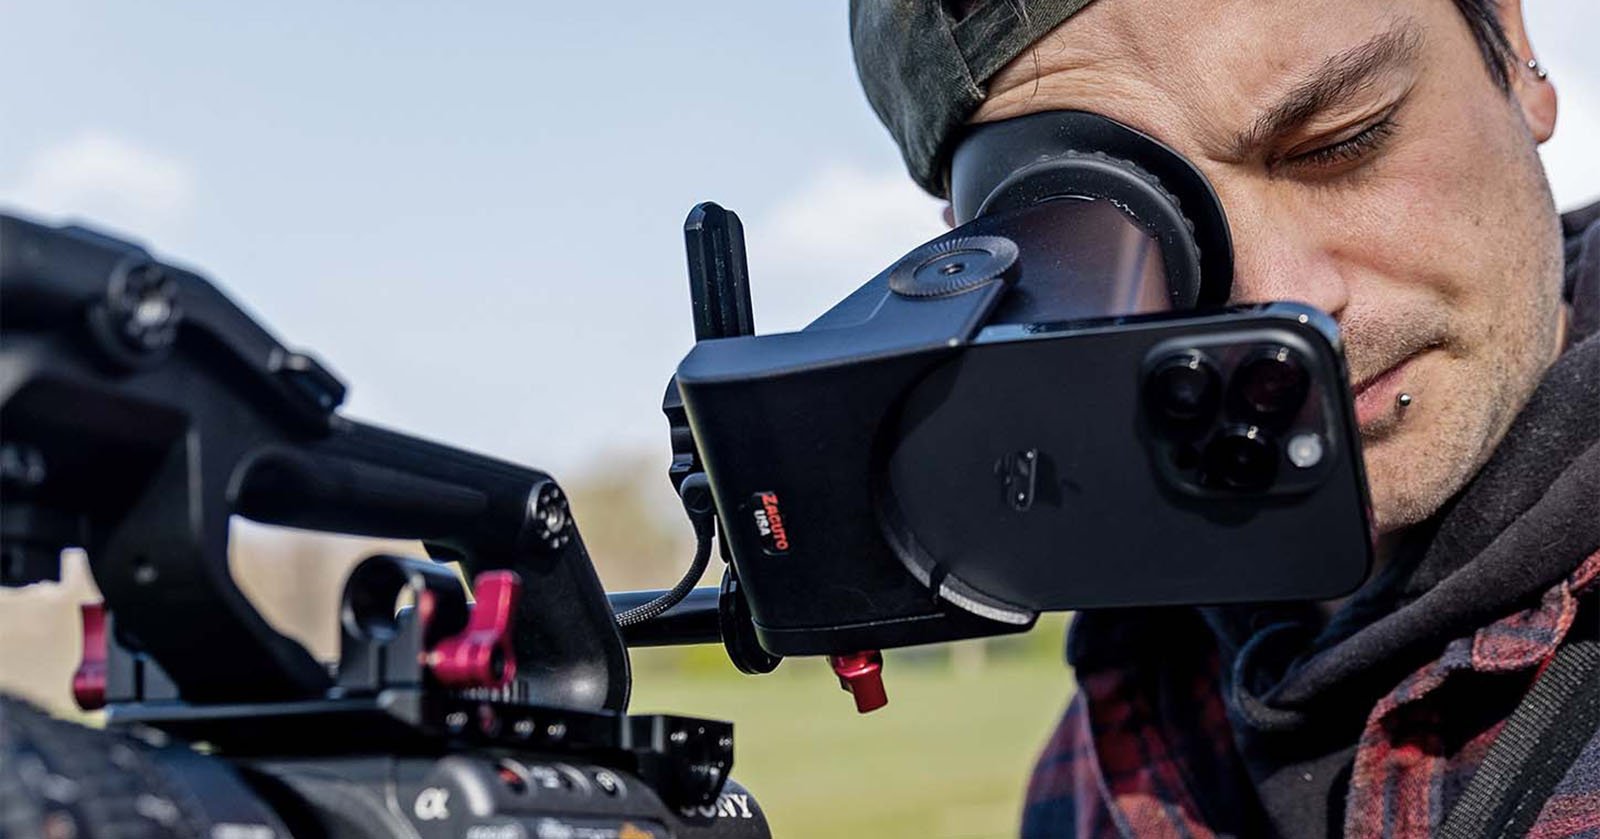 Zacuto and Accsoon Partner to Turn Your iPhone into a Camera Viewfinder